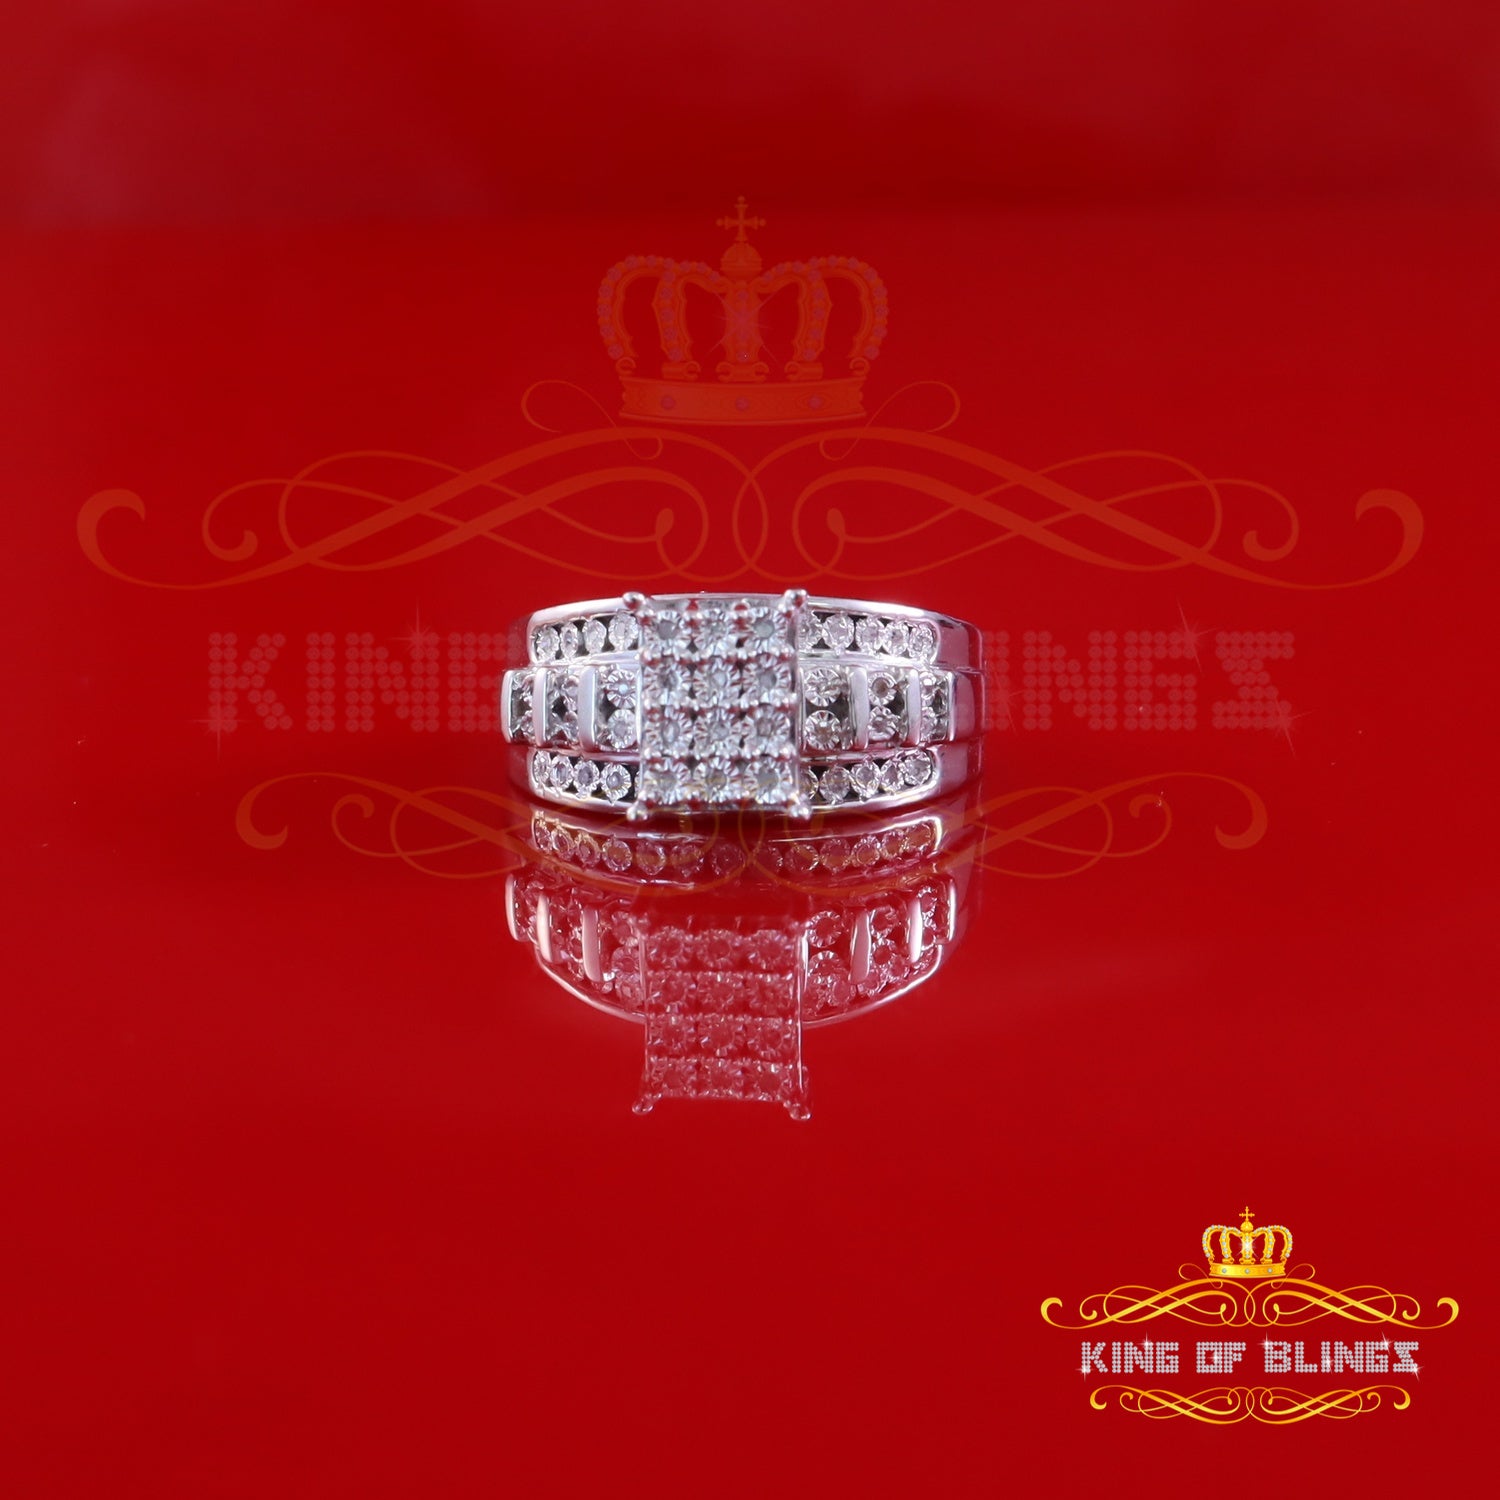 King Of Bling's Cinderella Rectangle 0.16ct Diamond 925 Silver White Square Womens Ring Size 8 KING OF BLINGS